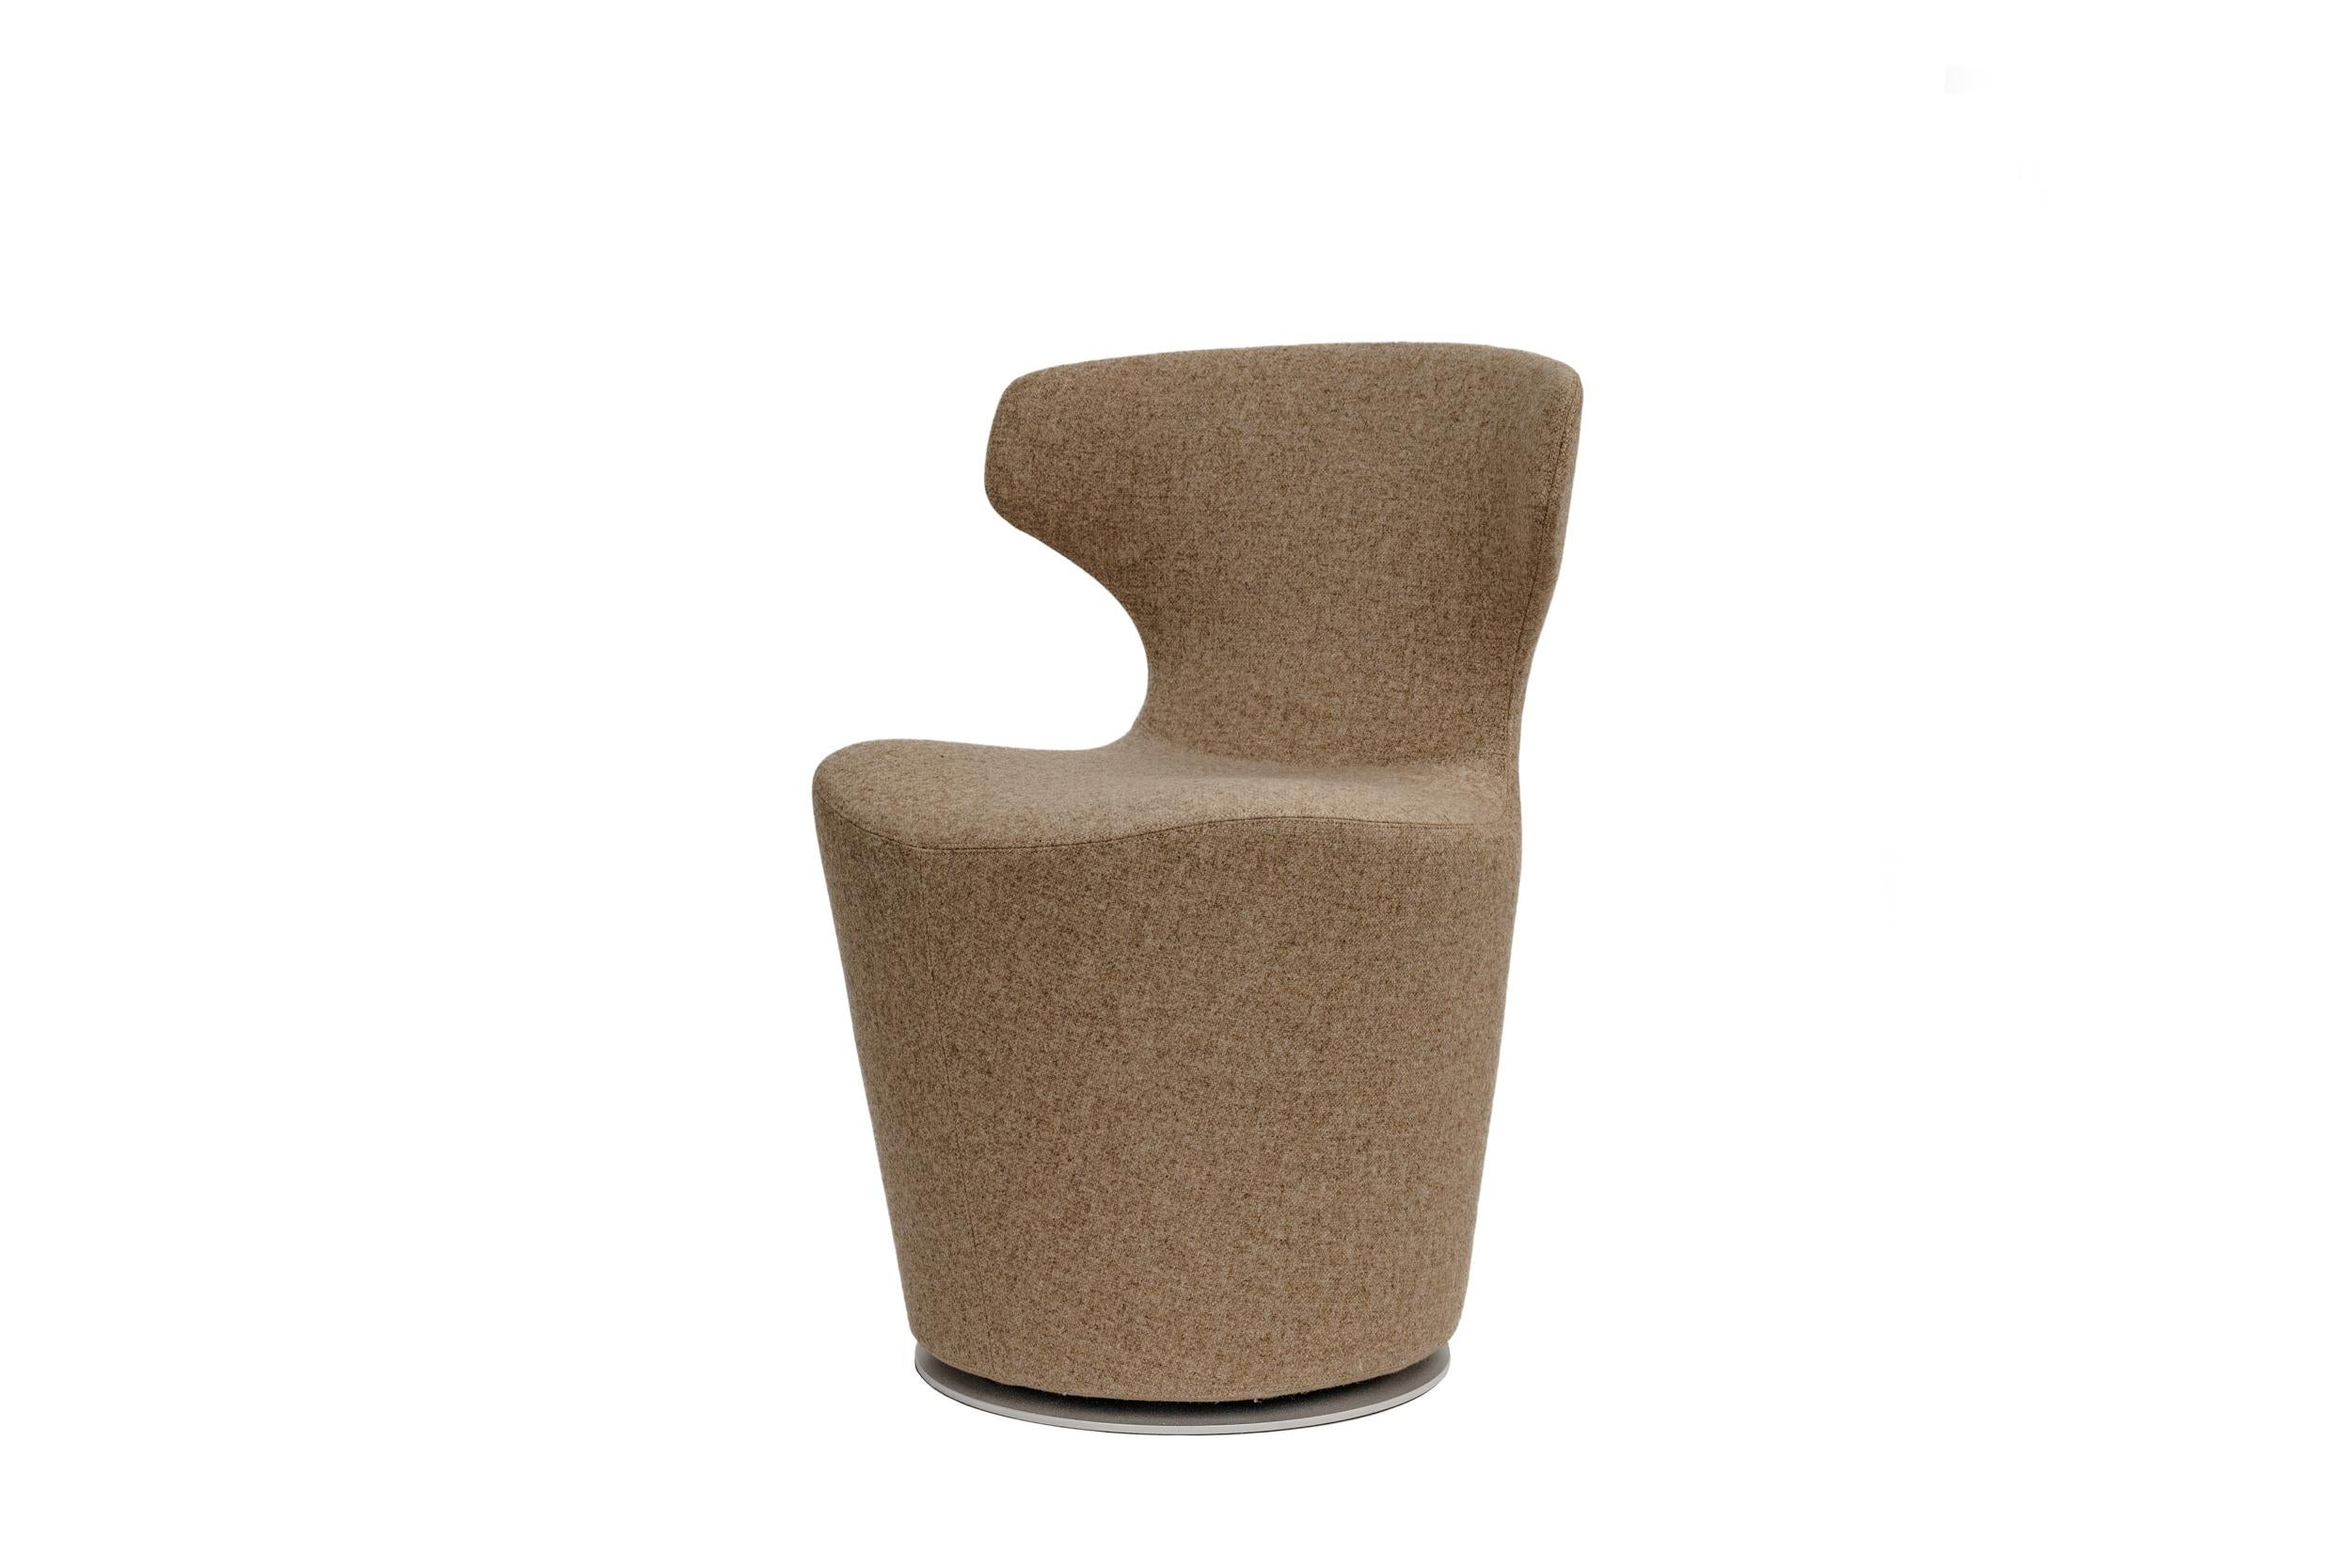 The Mini Papilio Armchair by B&B Italia is covered in a neutral warm beige wool blend with zipper detail down the back. This armchair is suited for both residential homes and public or corporate spaces. It echoes the characteristics of the iconic